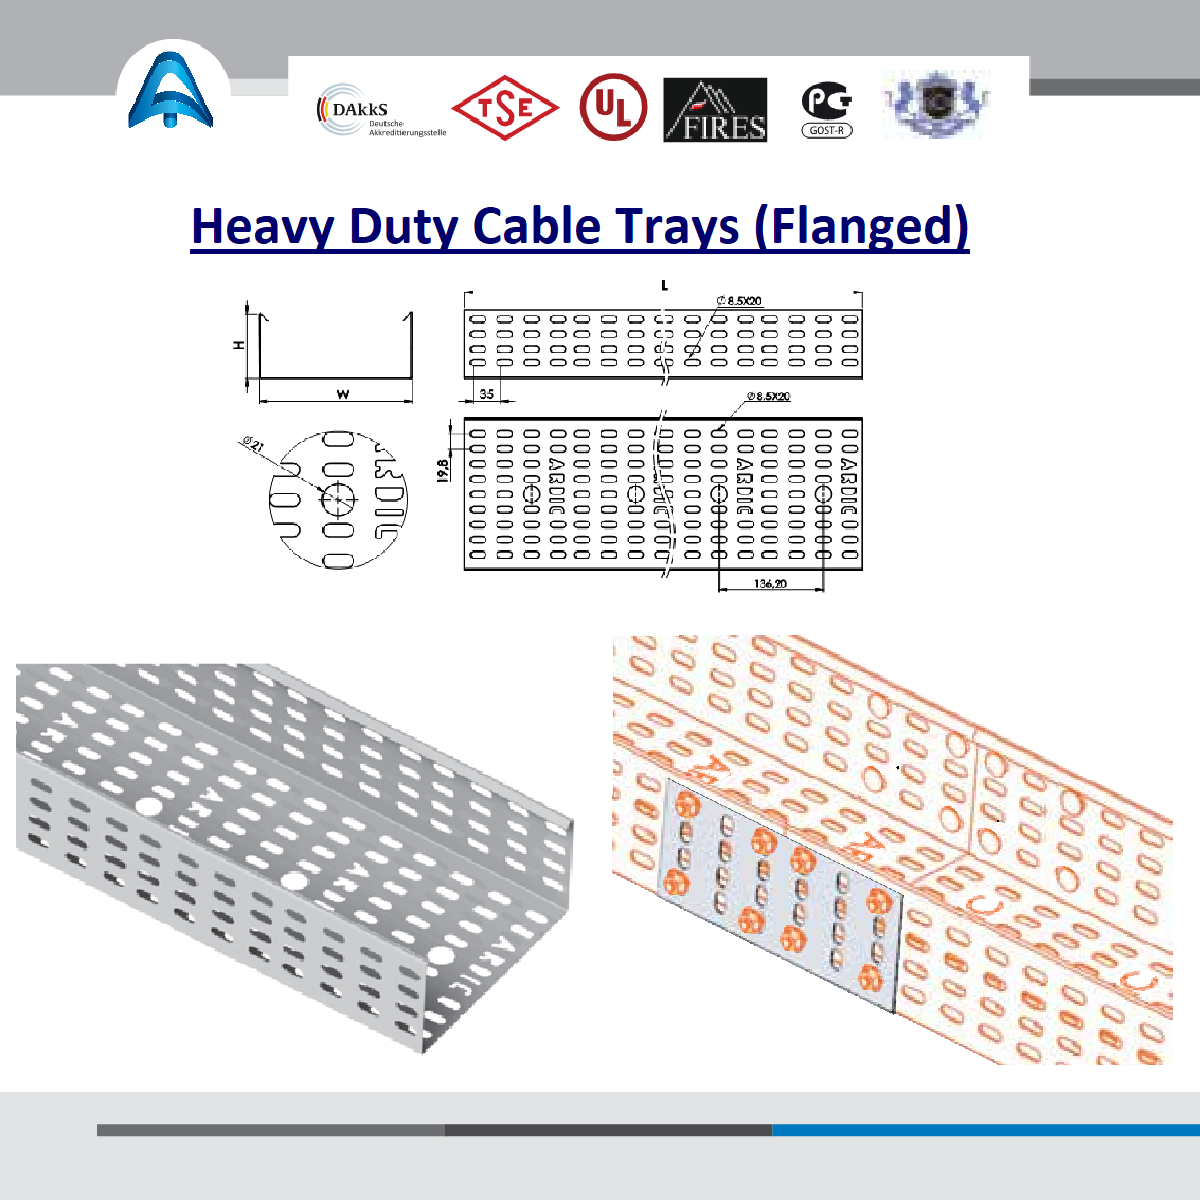 Heavy Duty Cable Trays (Flanged)